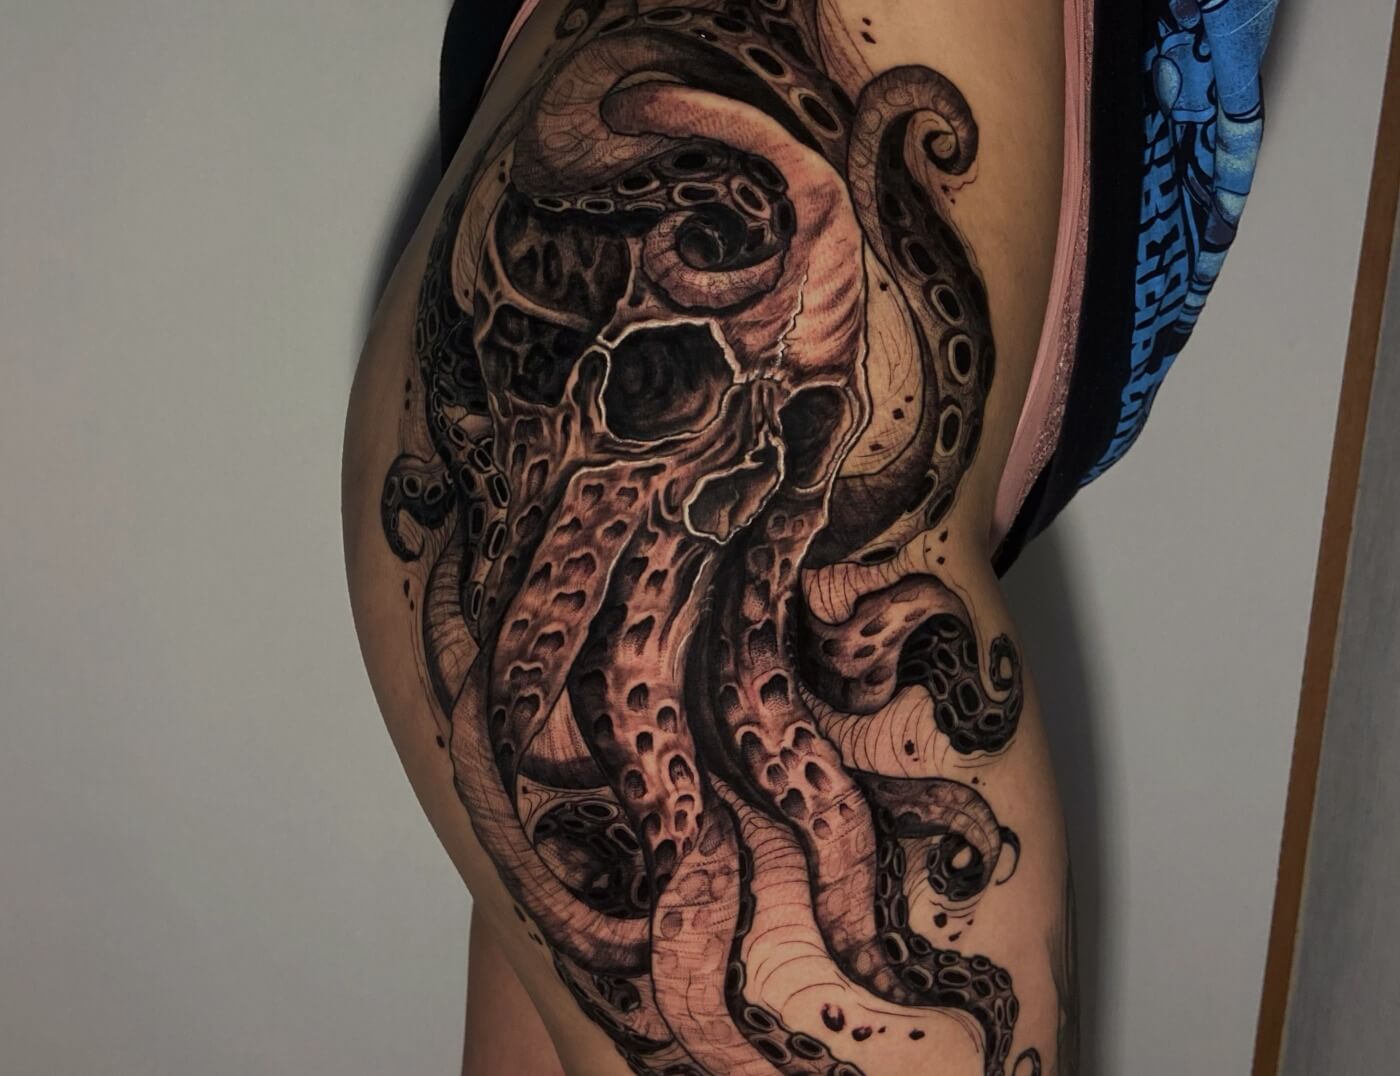 Octopus Black & Grey photo realism tattoo By Rene Cristobal A Guest Artist At Iron Palm Tattoos. Rene is a Chilean tattoo artist whom specializes in Black Work, Chicano, and Black & Grey tattoo styles. Rene is available for booking Sept 11th - 18th, 2023 at Iron Palm. We're open late night until 2AM. Call 404-973-7828 or stop by for a free consultation.